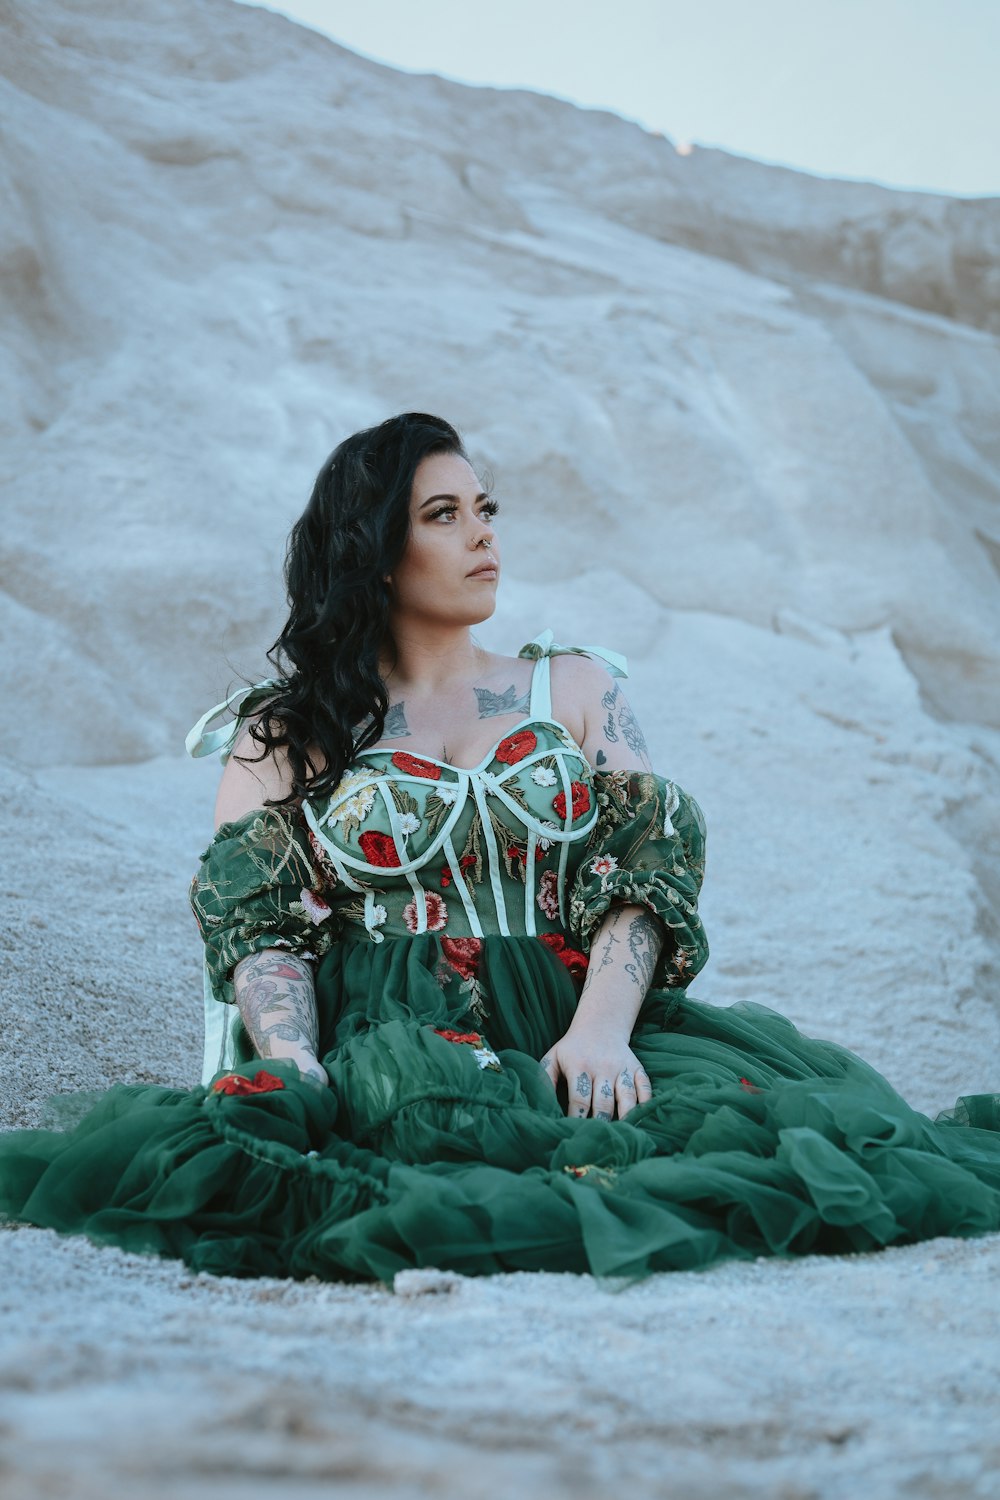 a woman in a green dress sitting on the ground